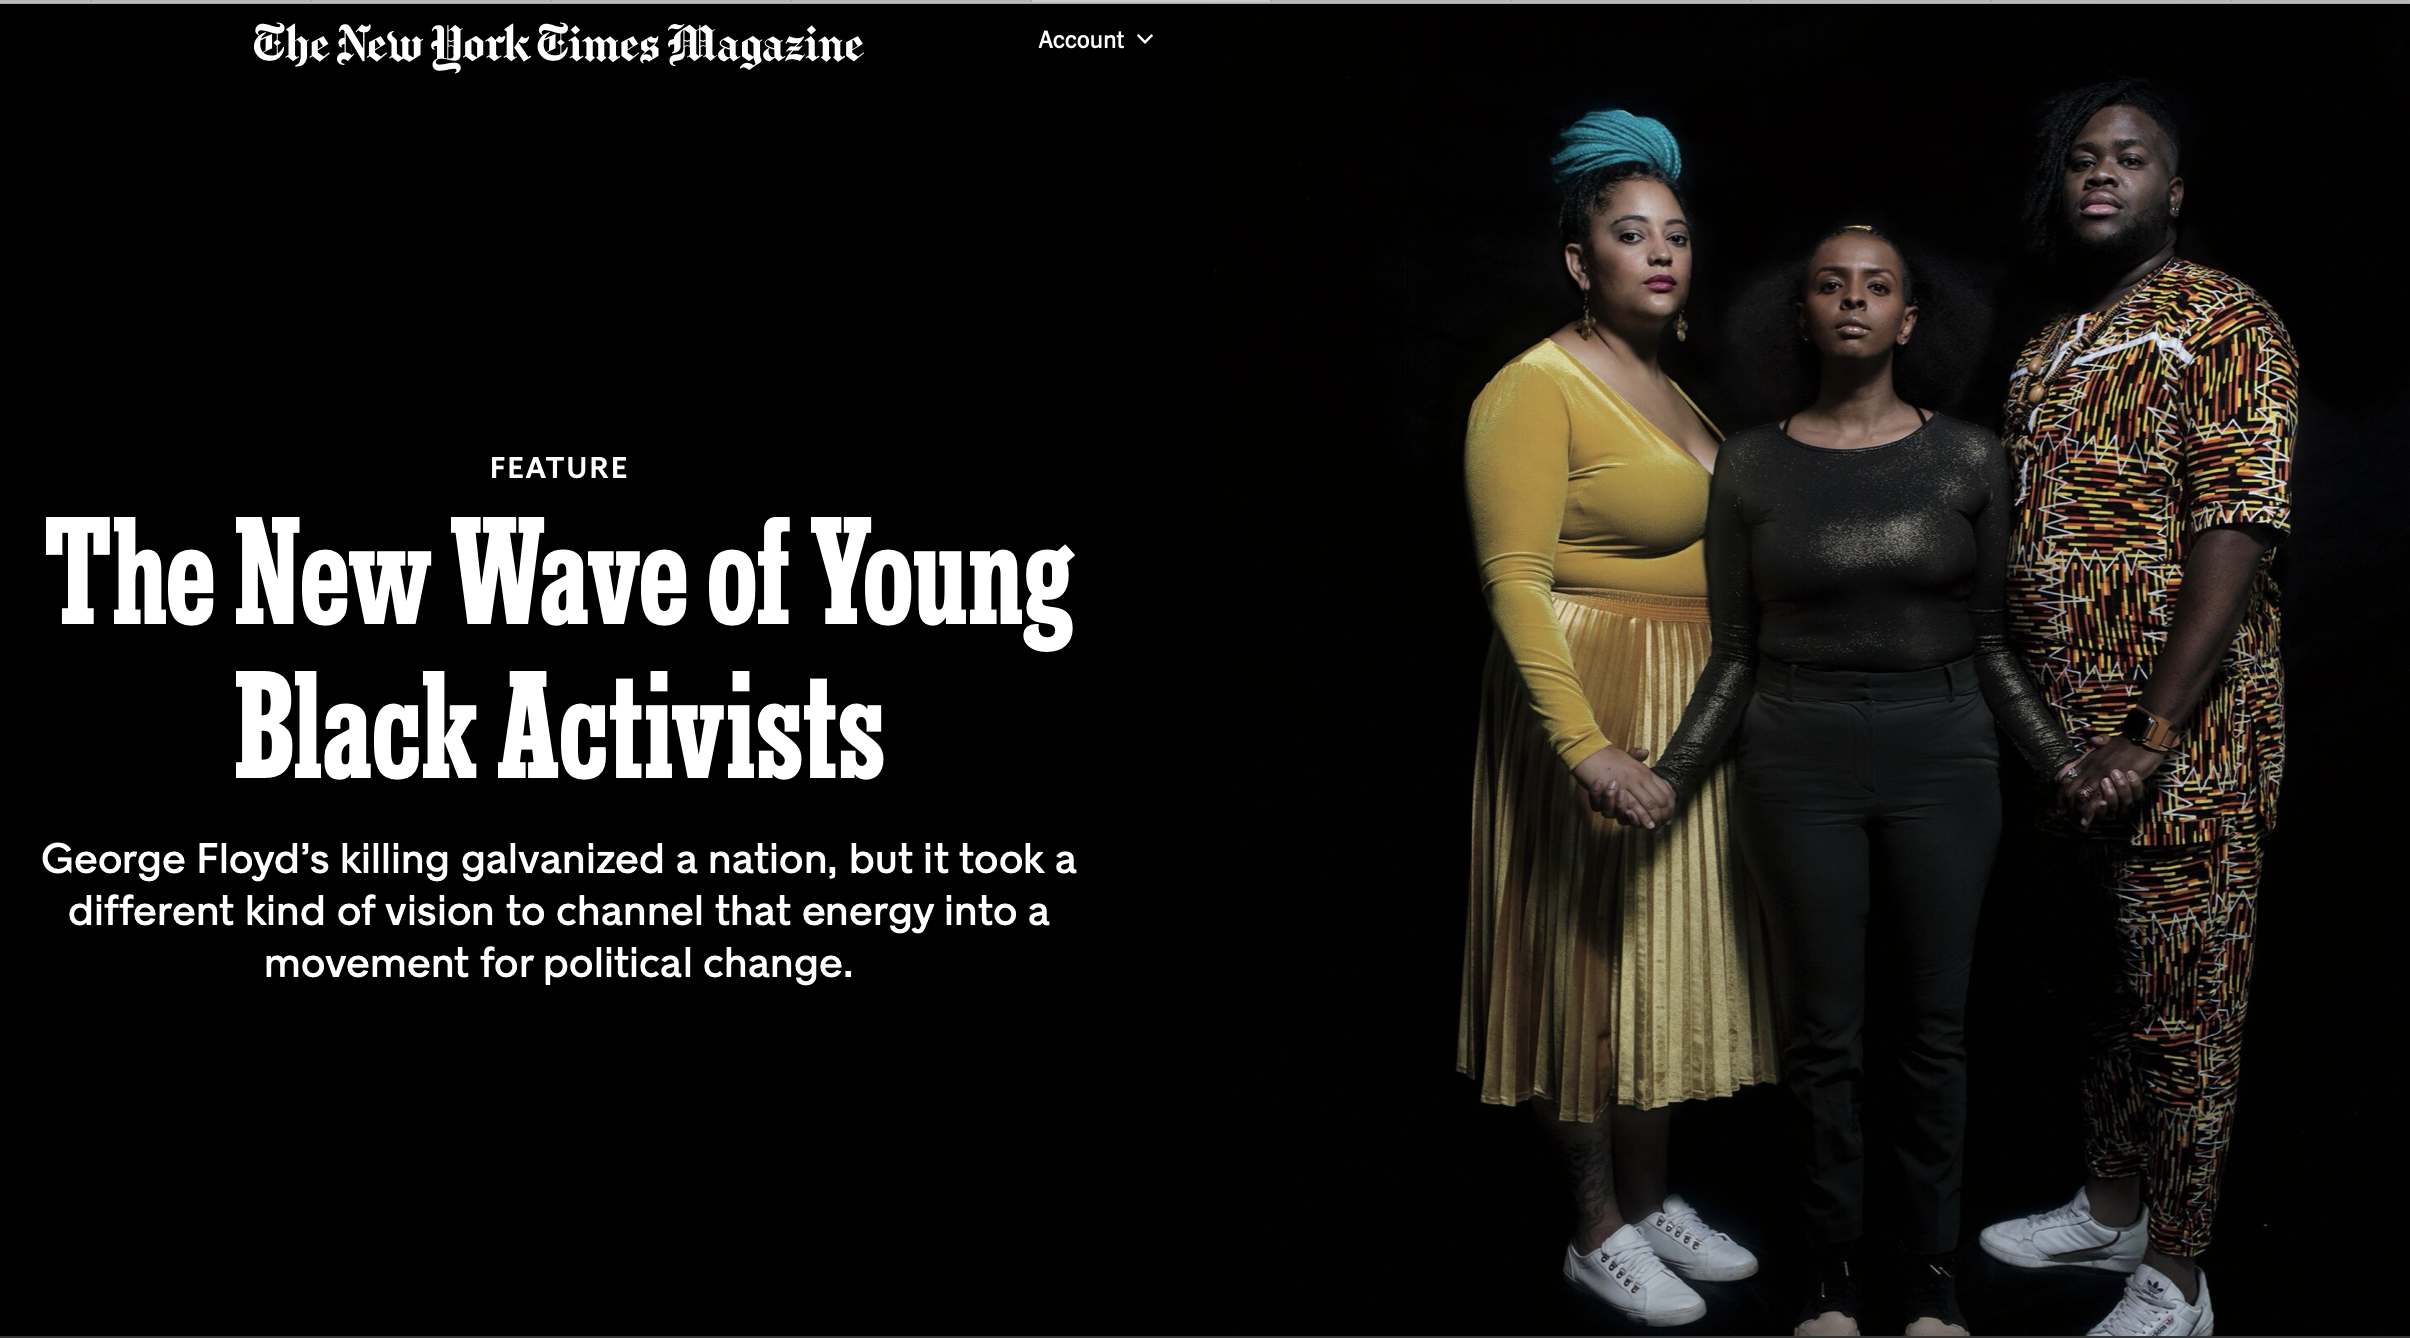 The New Wave of Young Black Activists